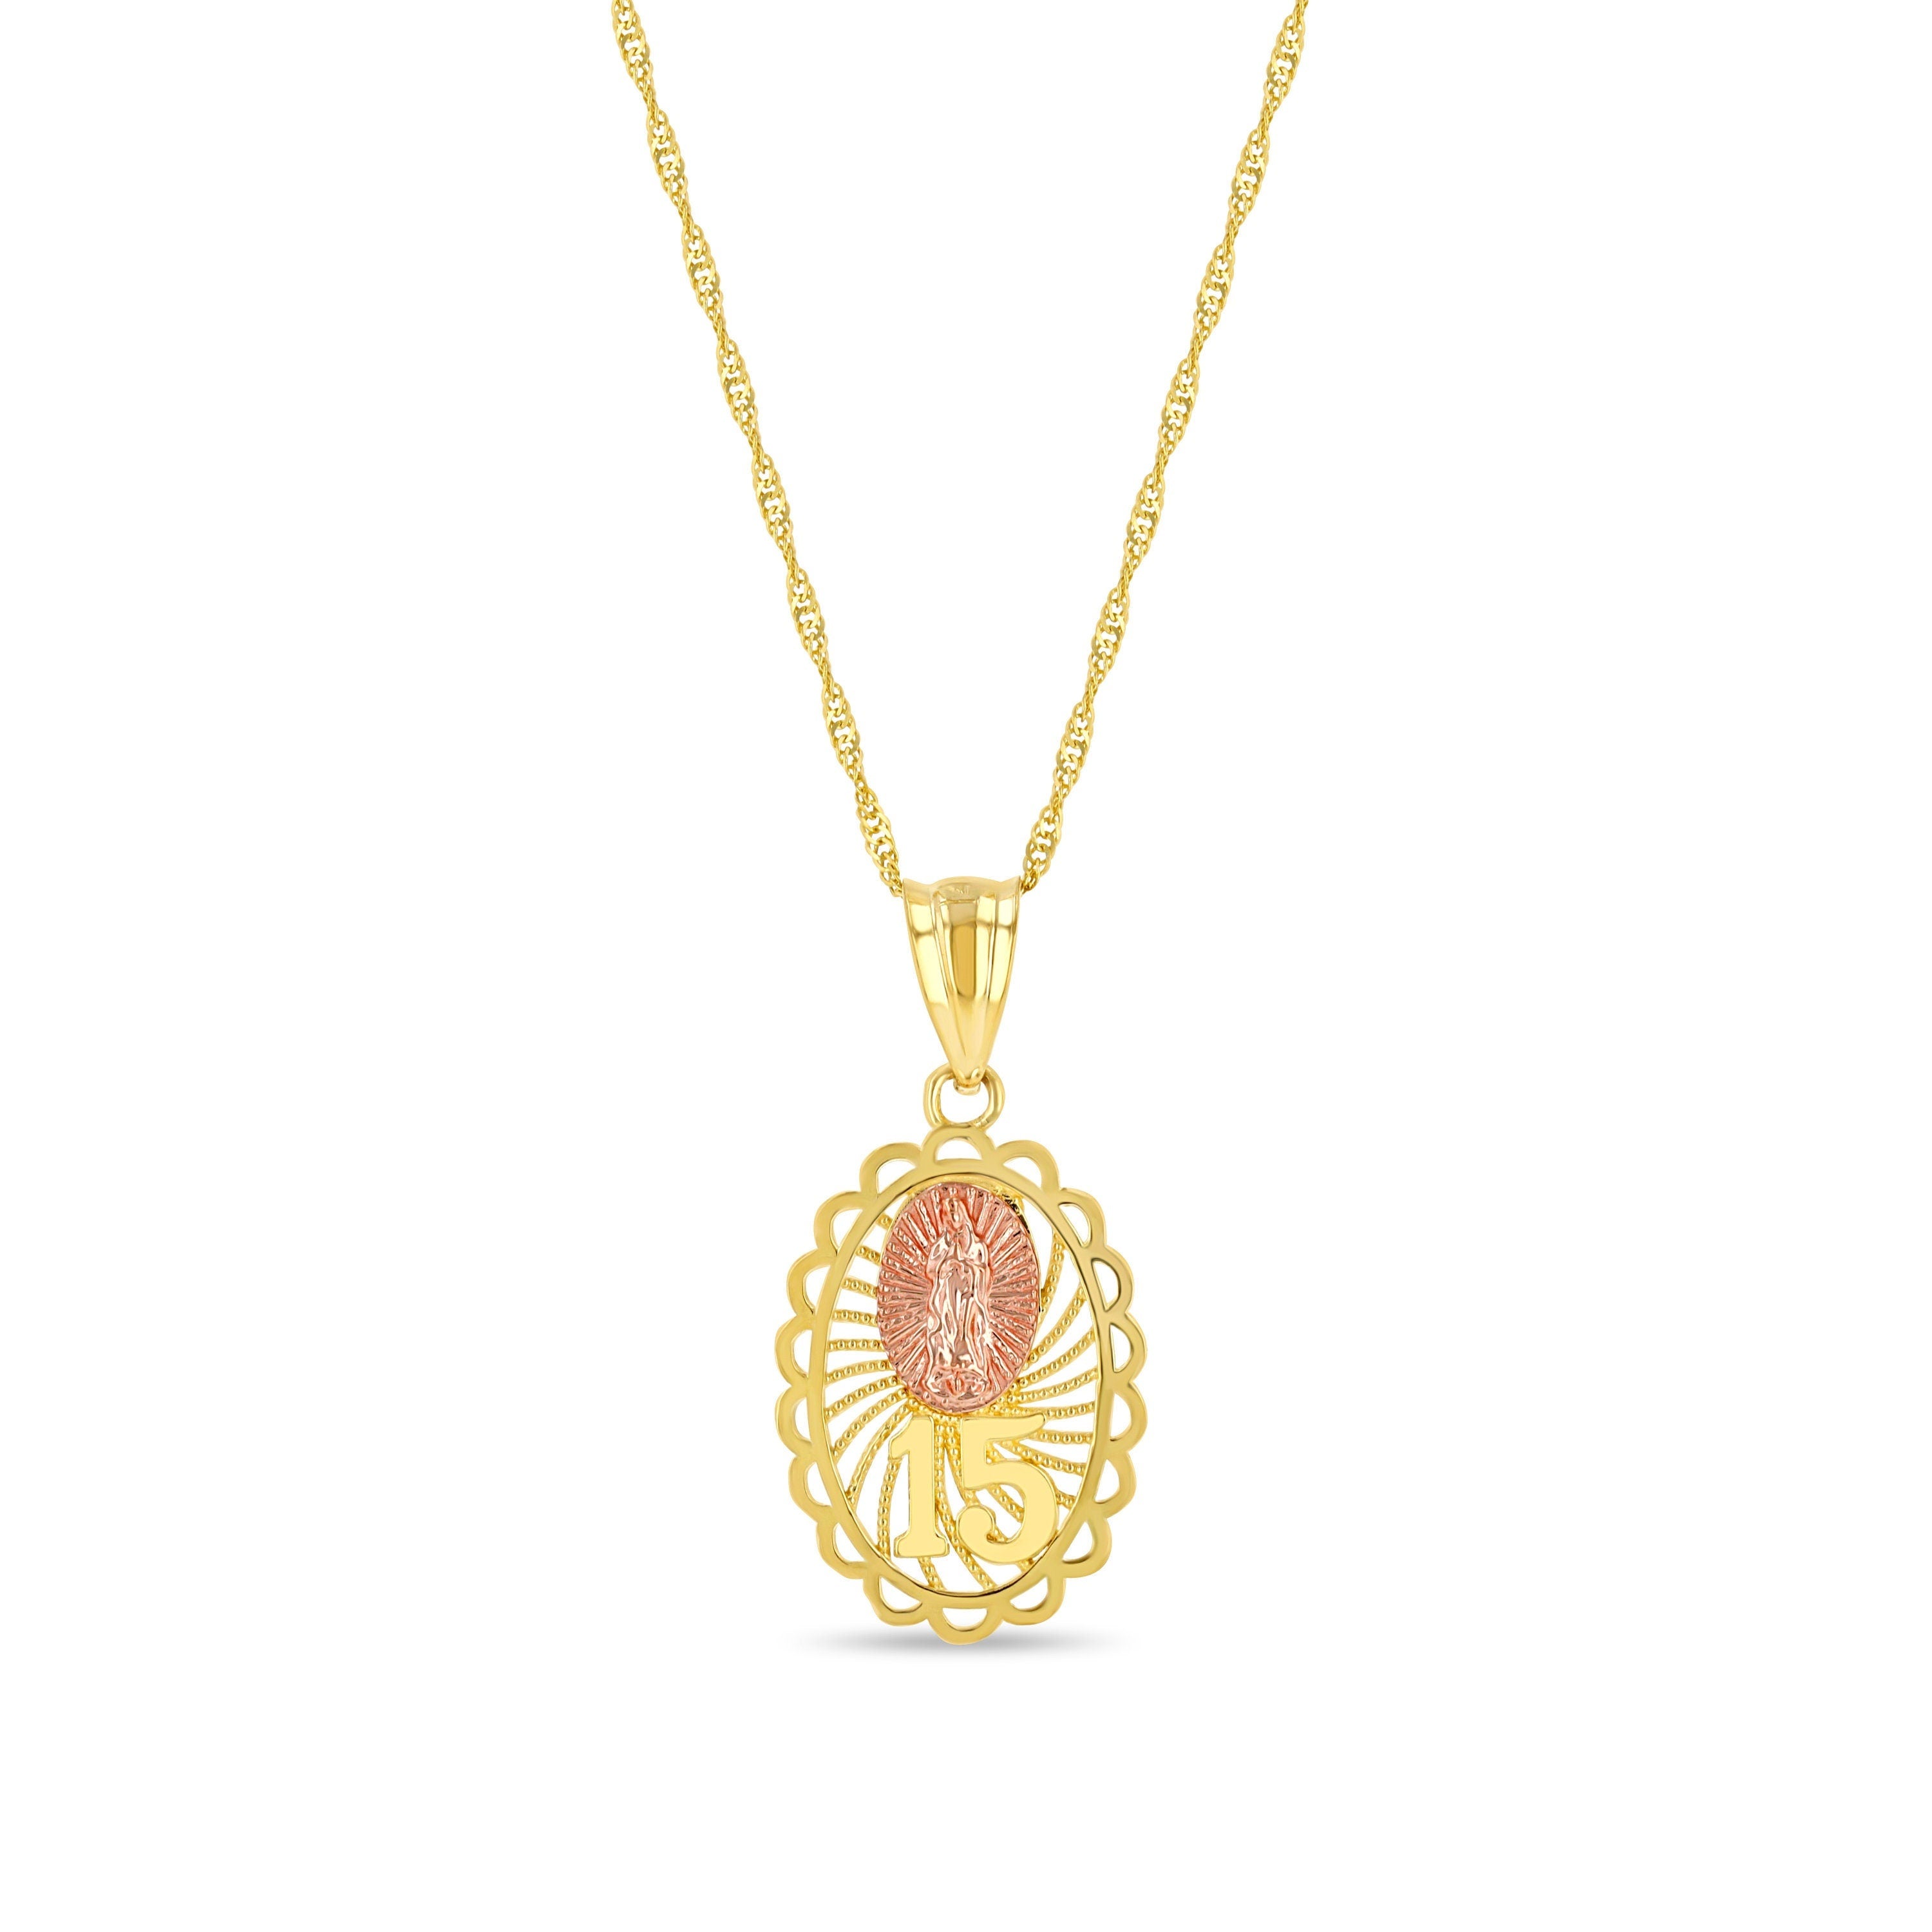 14k solid two tone Sweet 15 oval pendant on 18" solid gold chain